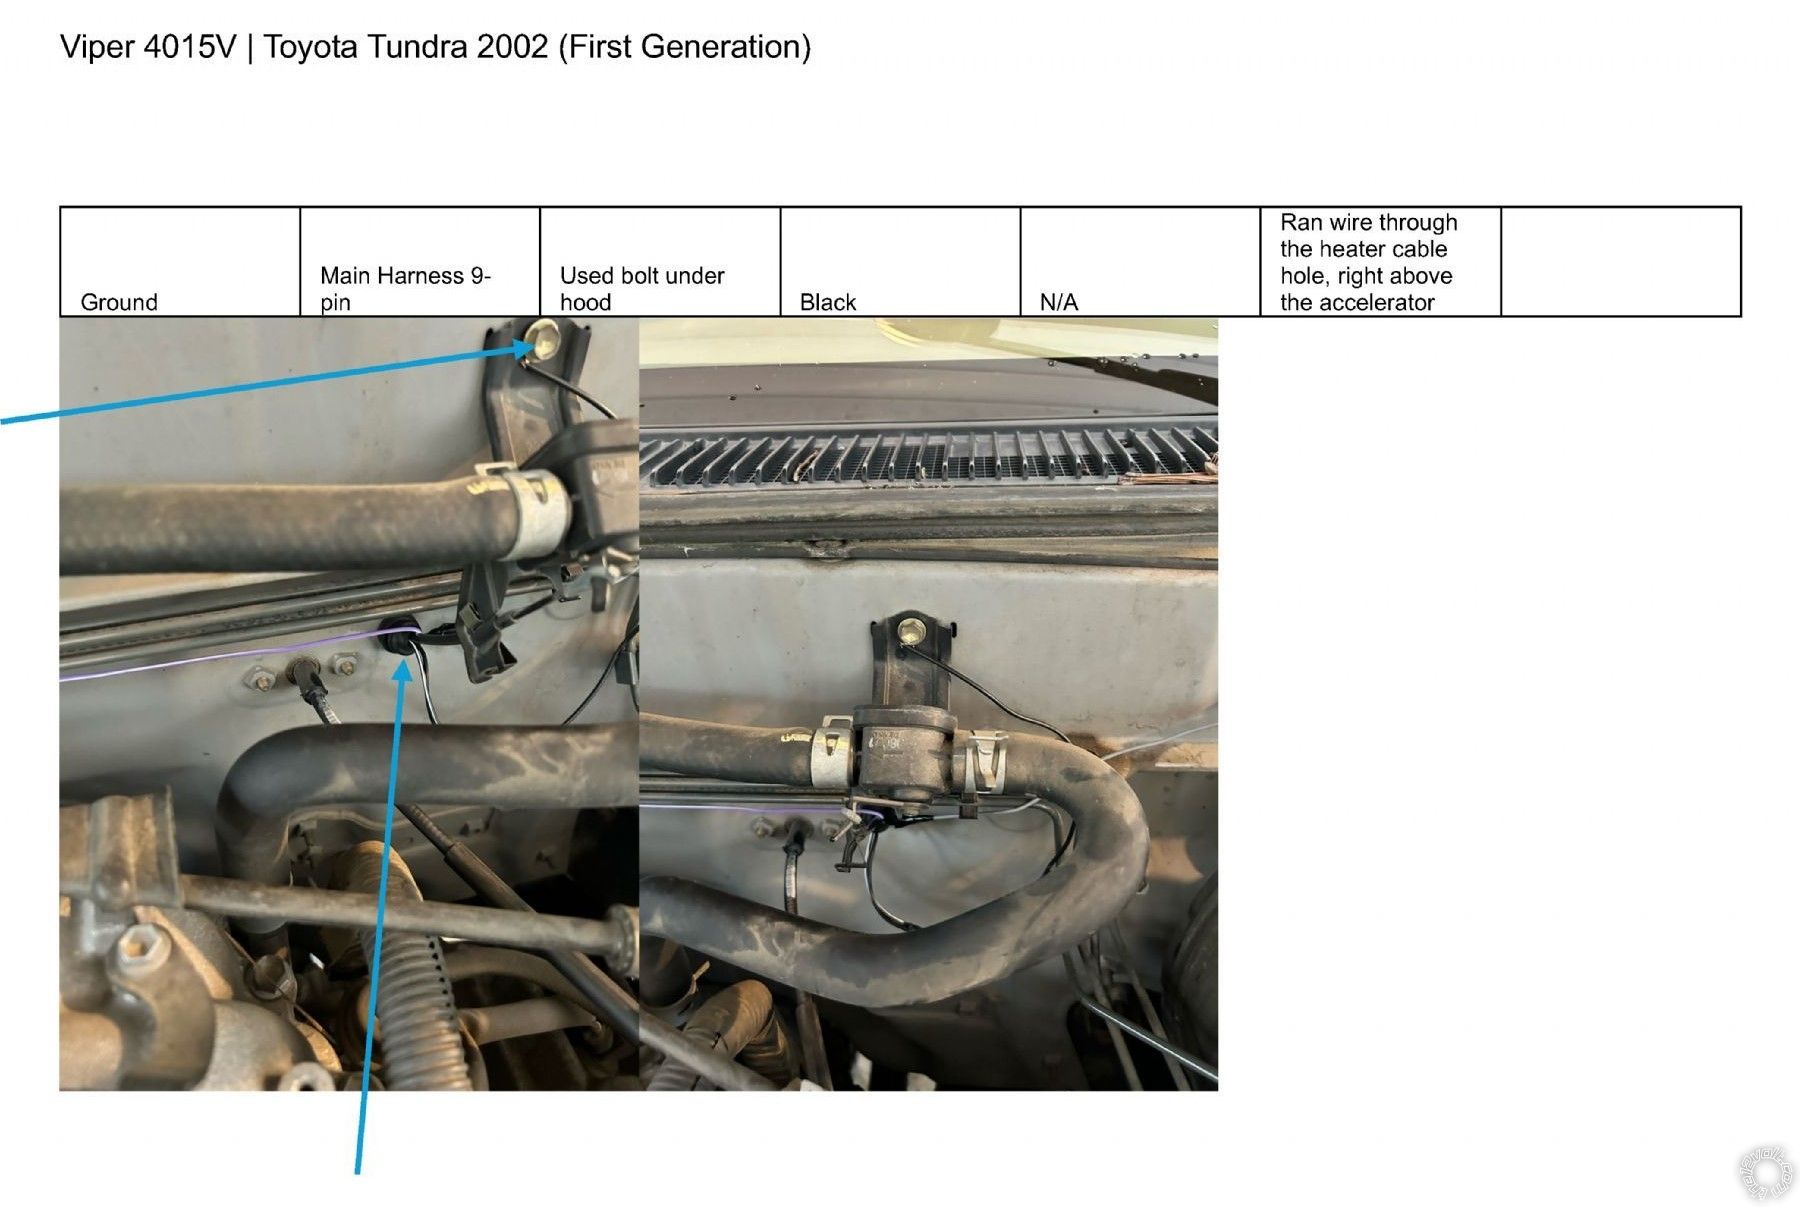 2002 Toyota Tundra, Viper 4105v Remote Start, Pictorial - Last Post -- posted image.